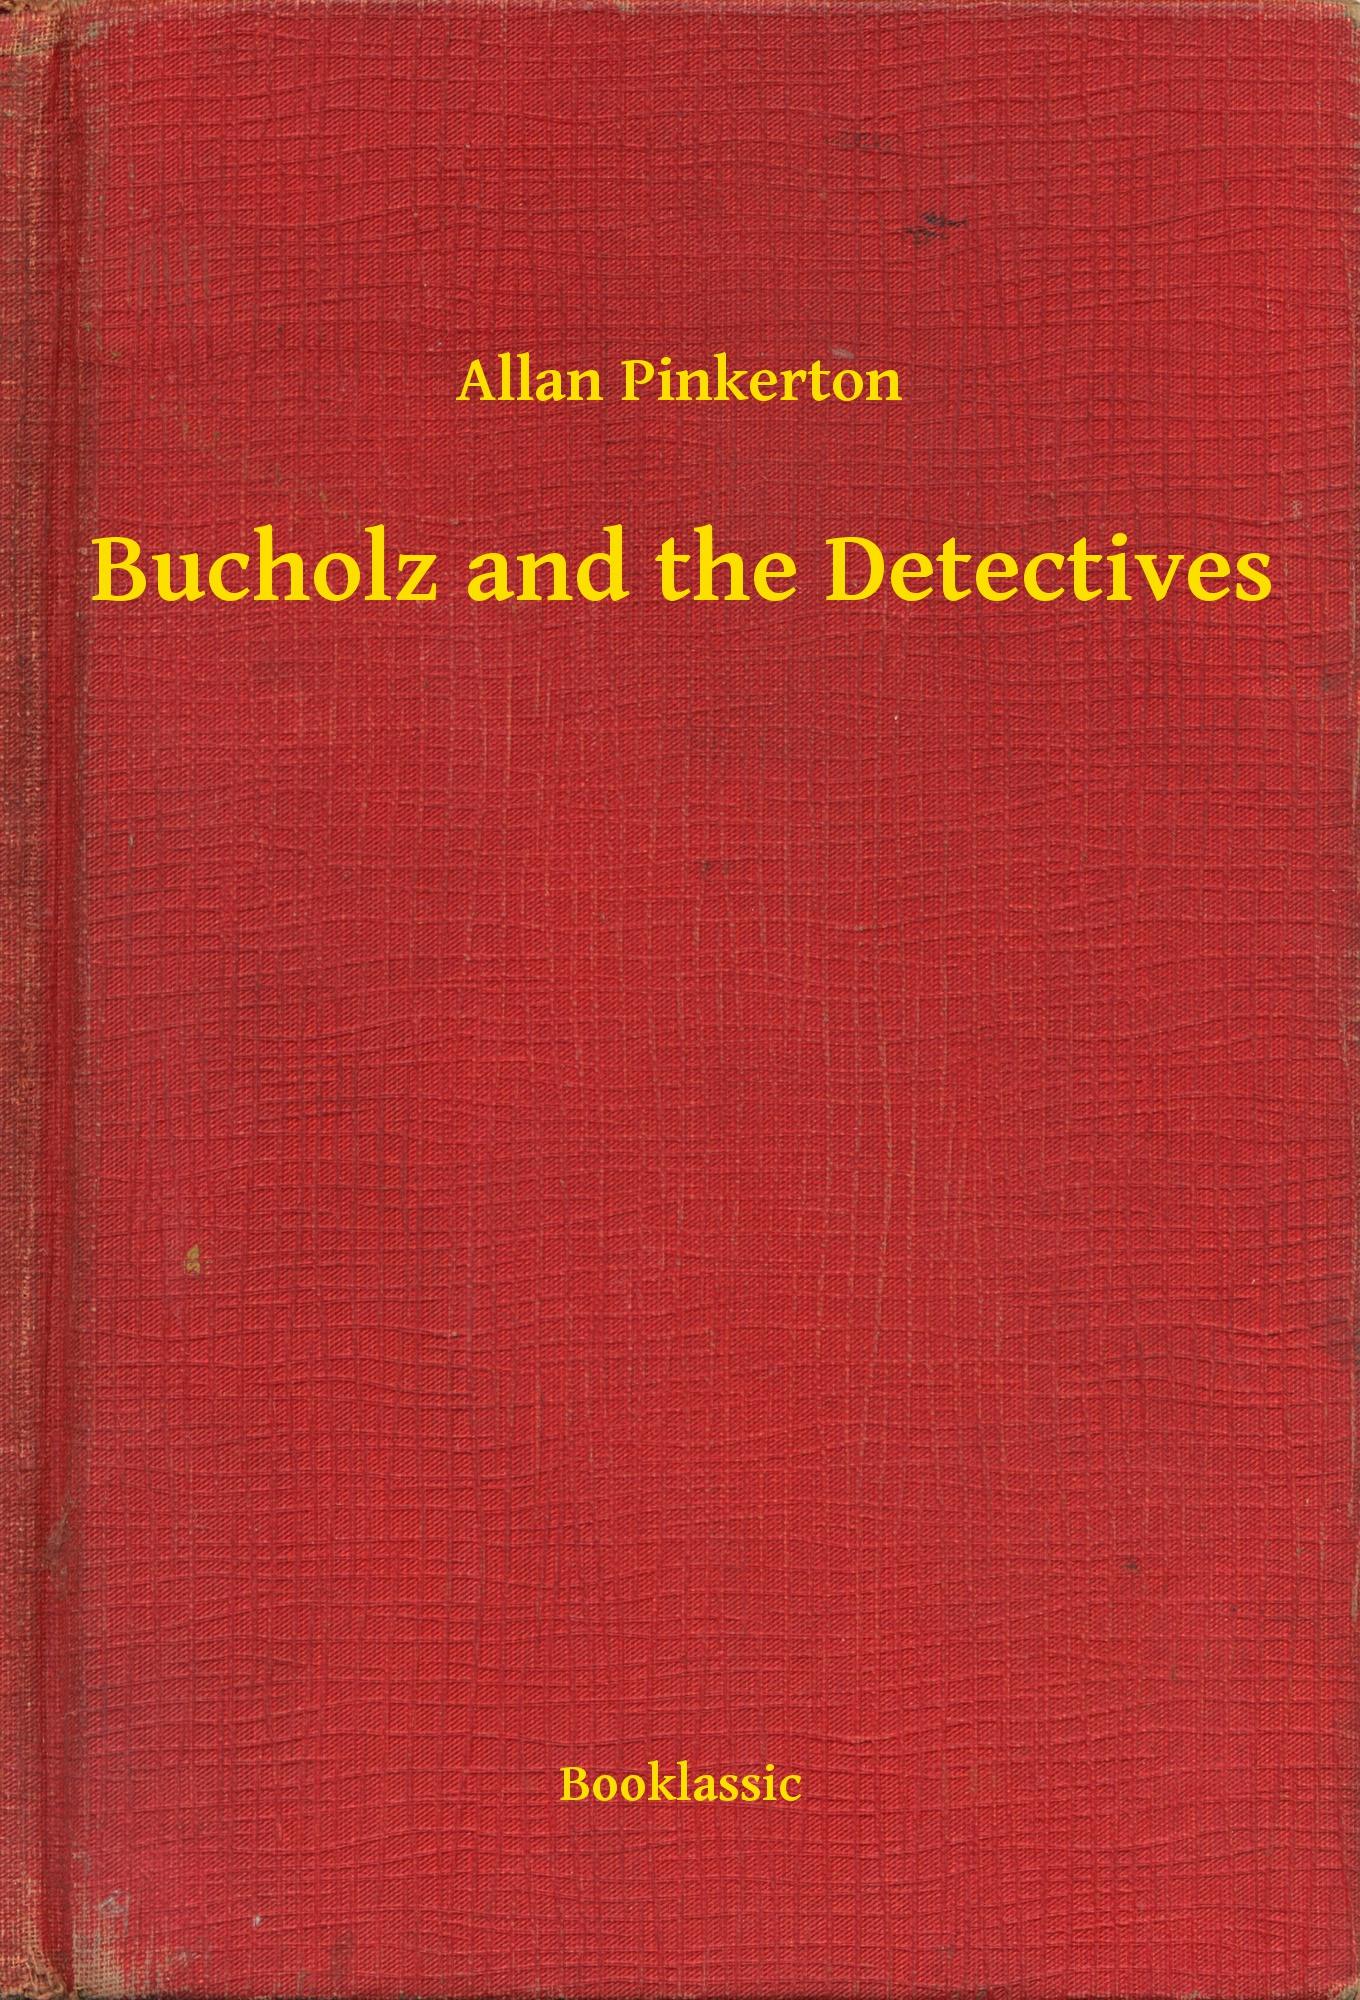 Bucholz and the Detectives - Allan Pinkerton